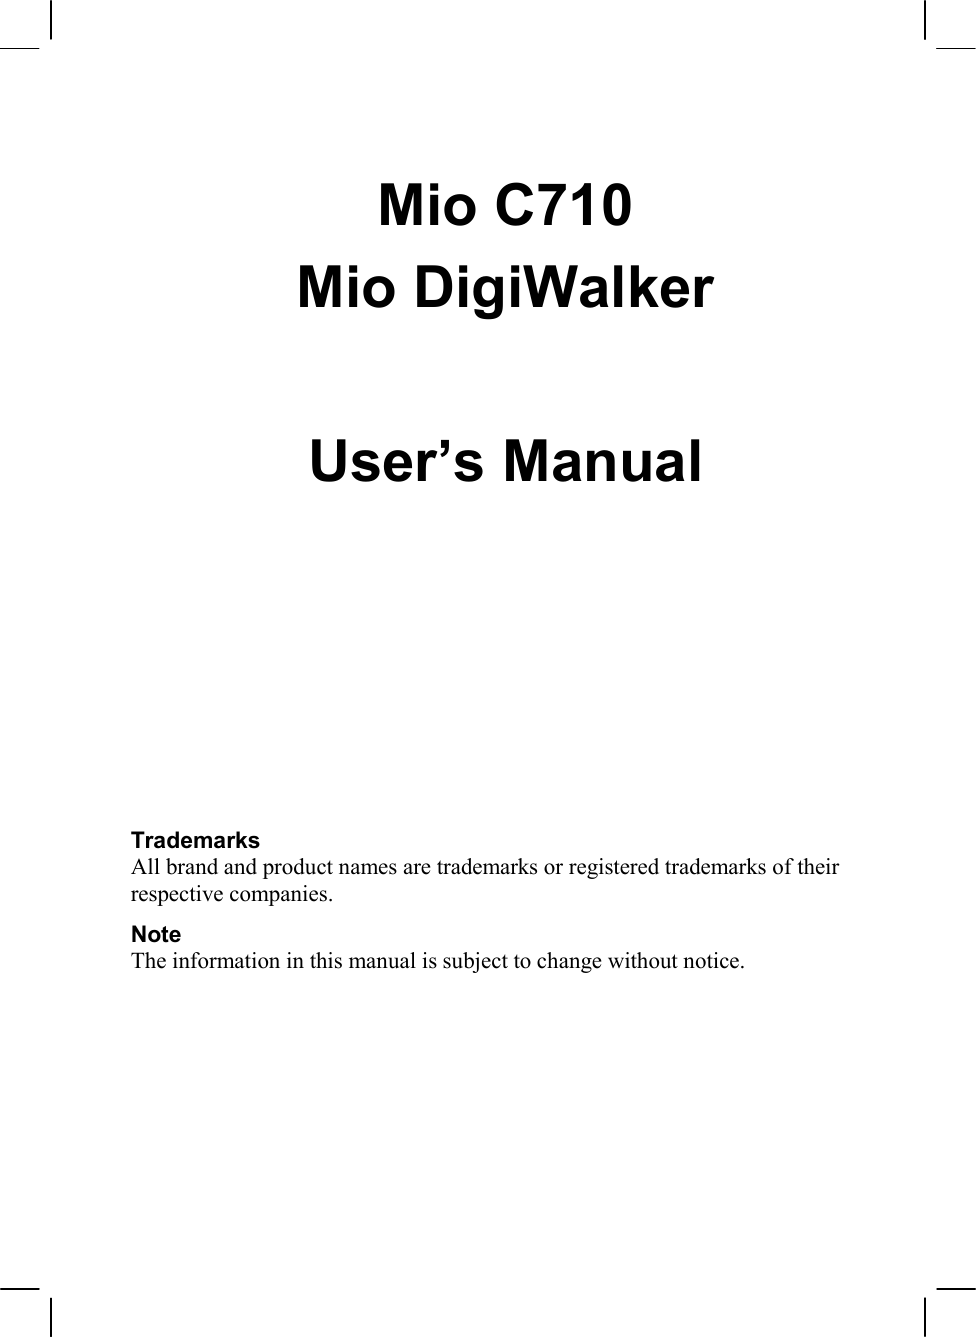   Mio C710 Mio DigiWalker   User’s Manual         Trademarks All brand and product names are trademarks or registered trademarks of their respective companies. Note The information in this manual is subject to change without notice.  